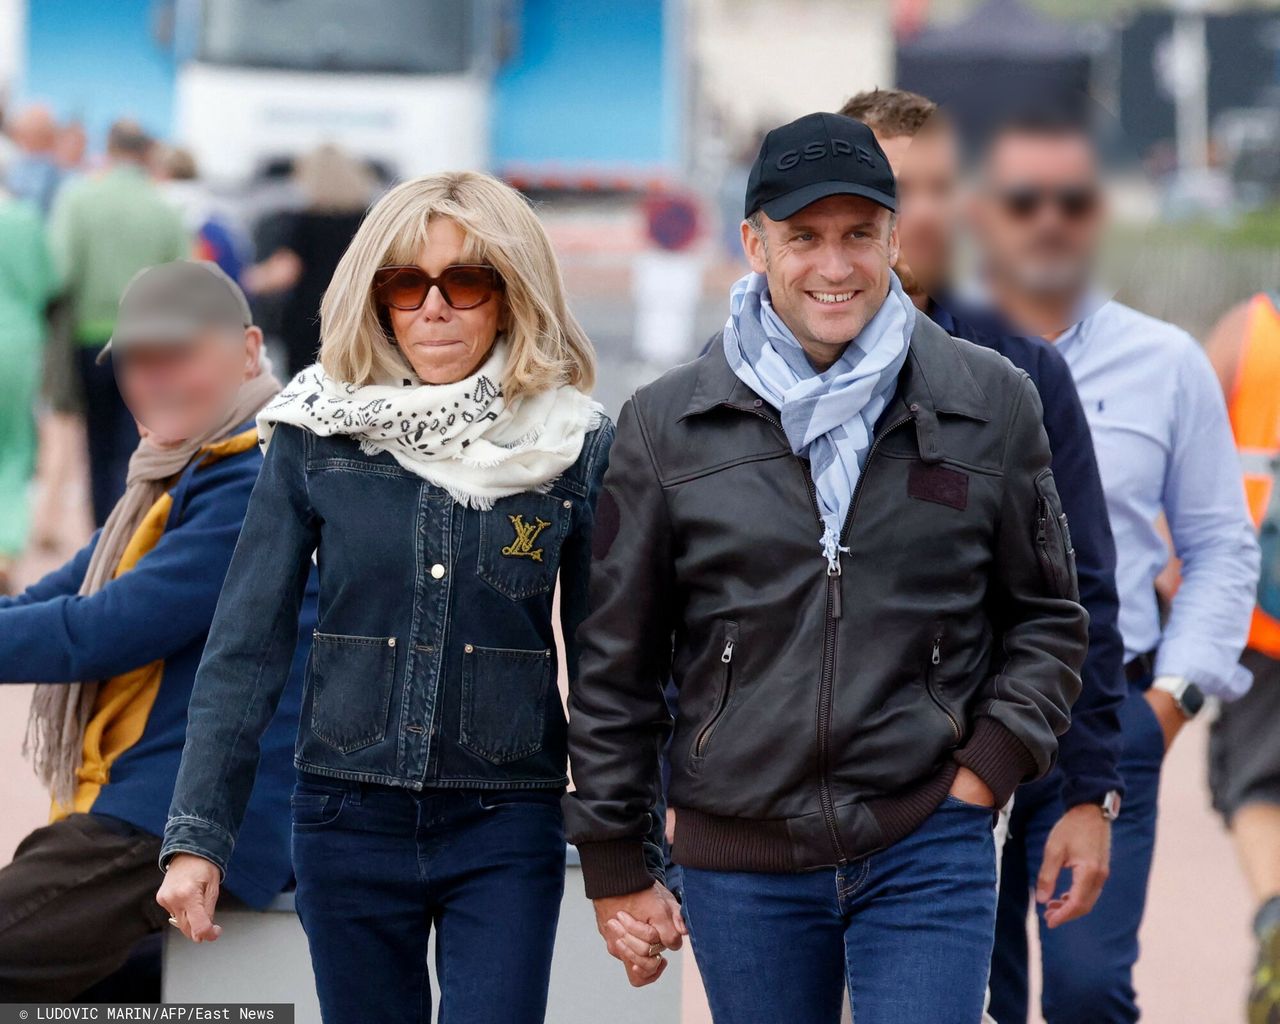 Brigitte Macron with her husband in unconventional outfits at the air shows